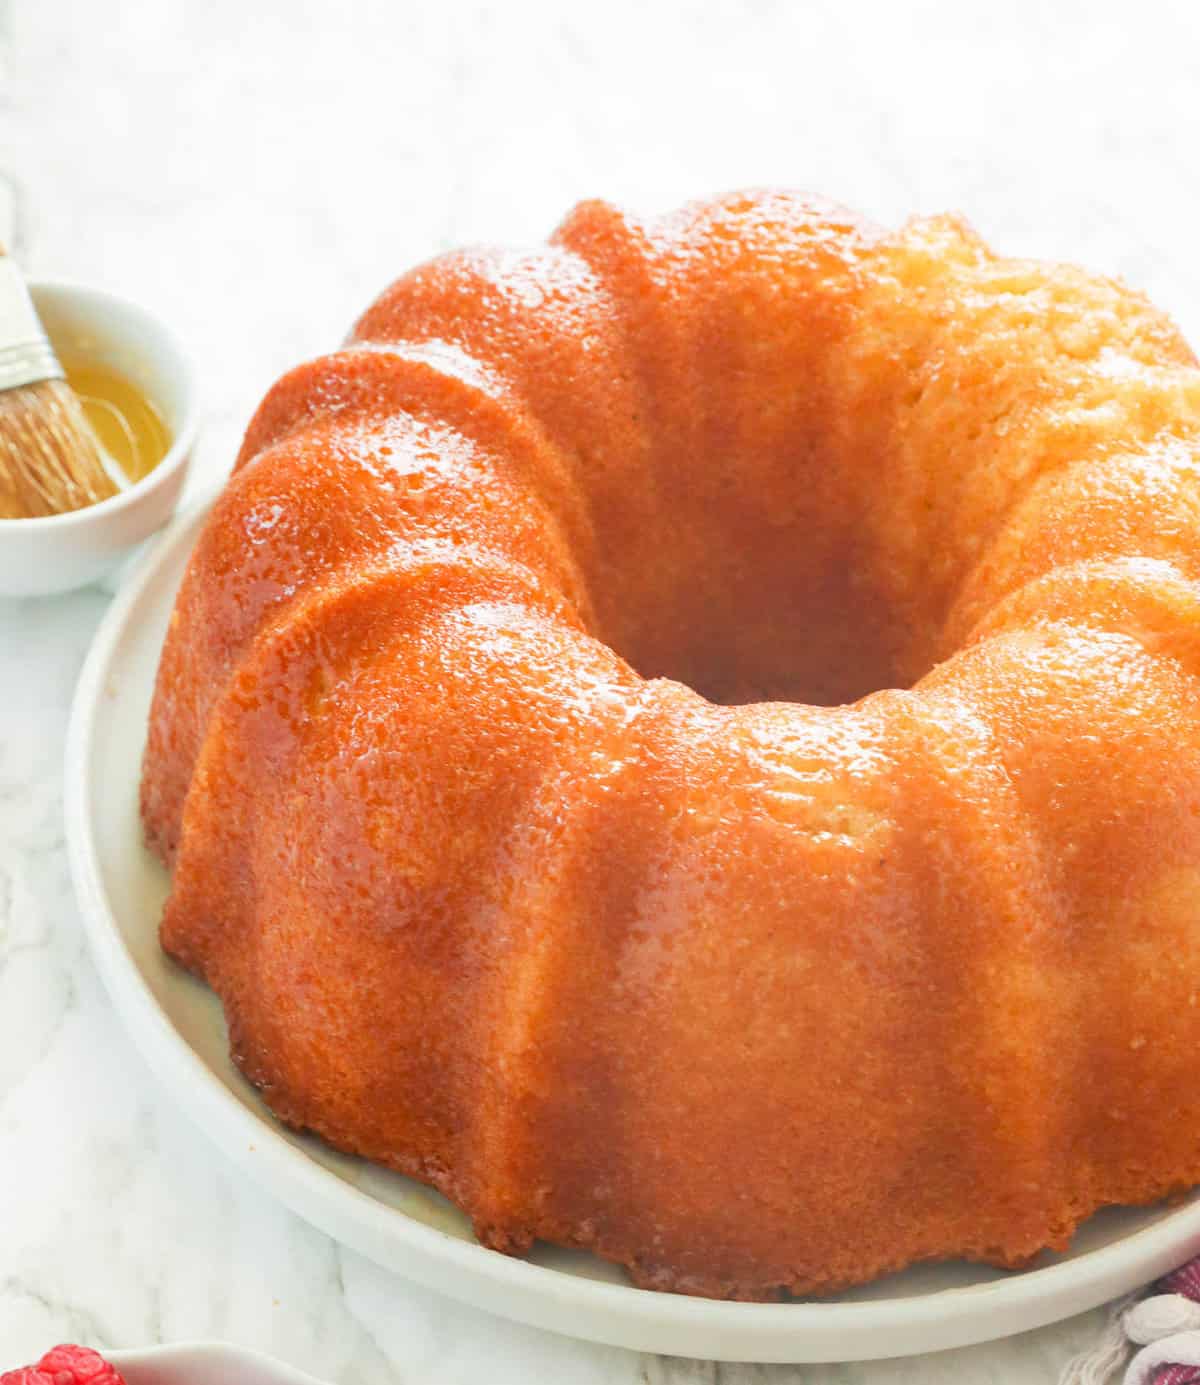 This Kentucky cake is insanely moist with a buttery bourbon glaze